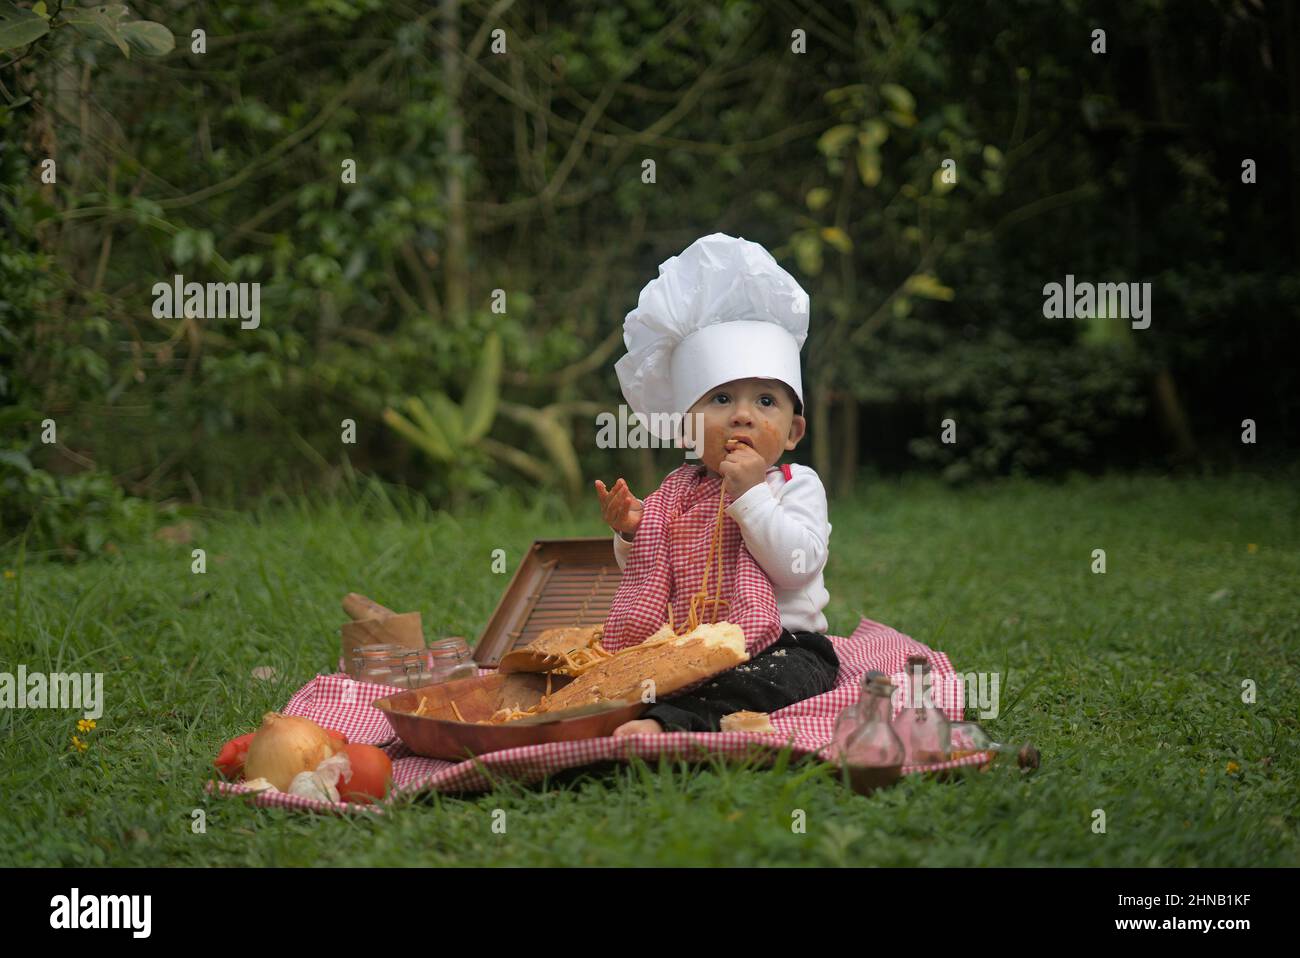 Adorable Caucasian child doing a picnic with pasta on the grass in a chef uniform Stock Photo